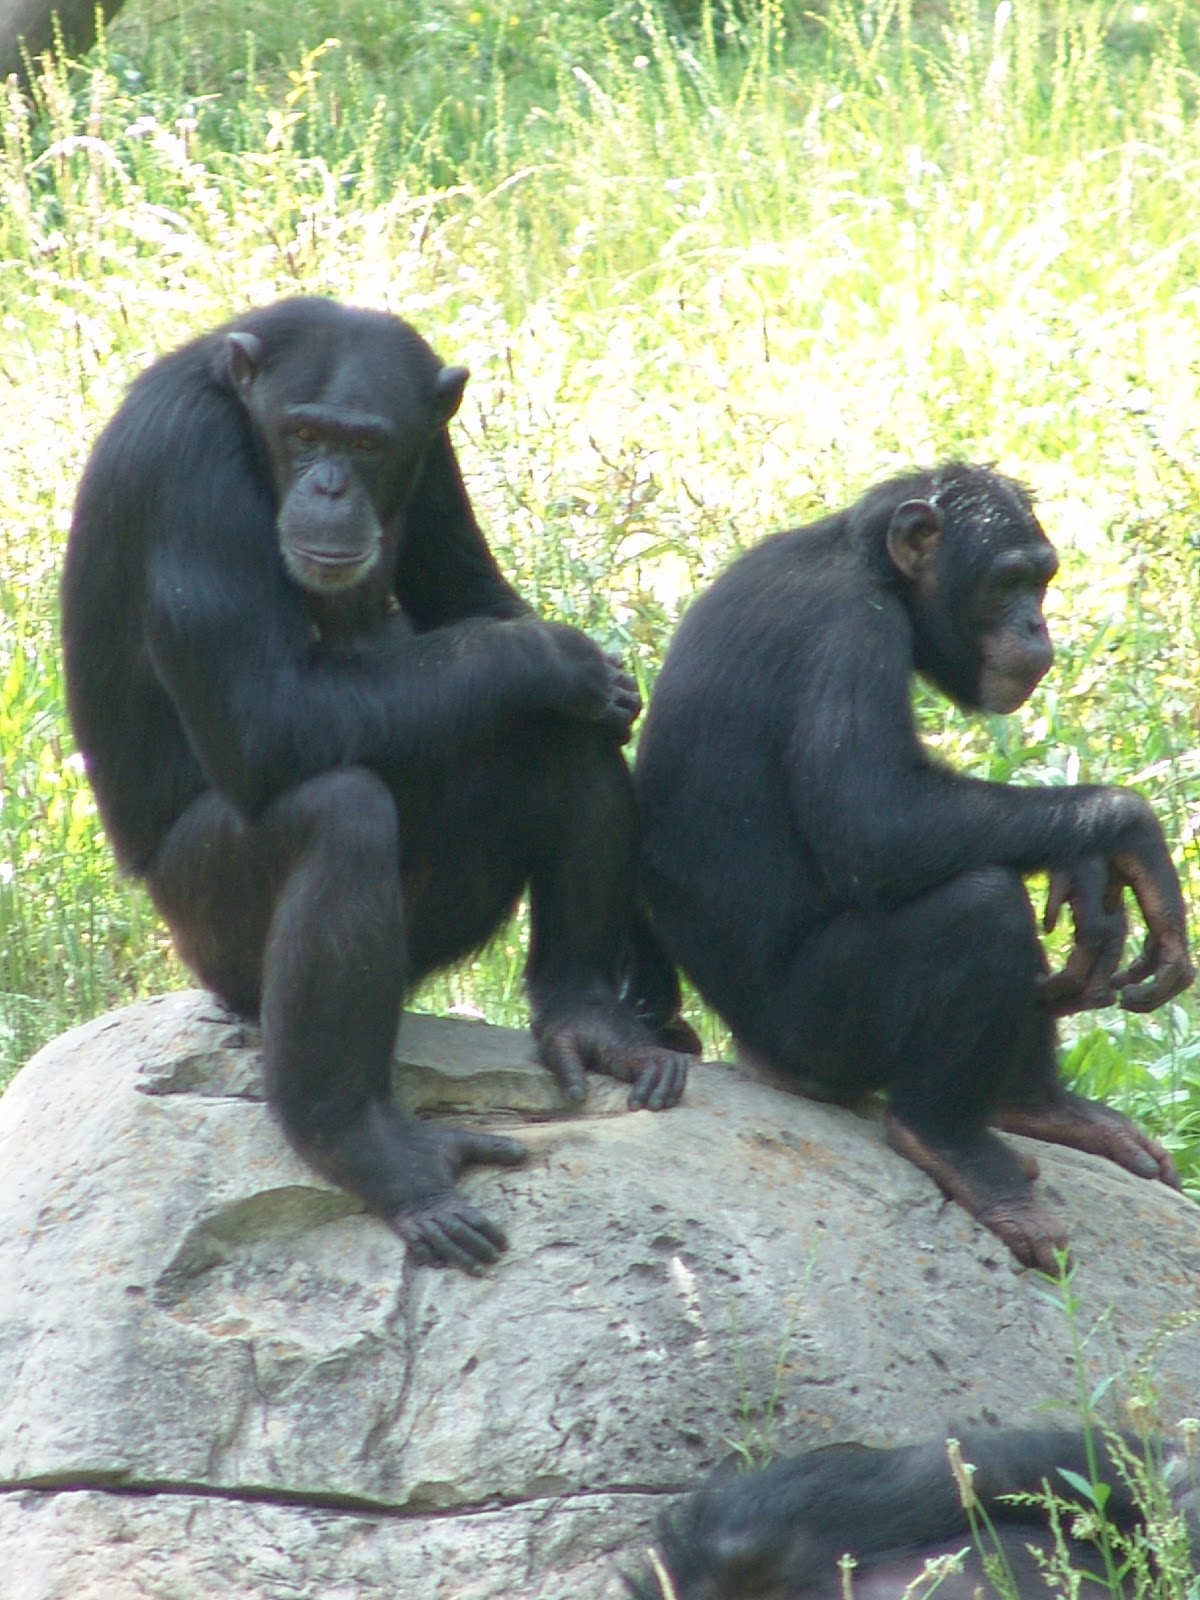 ENCYCLOPEDIA OF ANIMAL FACTS AND PICTURES: CHIMPANZEE